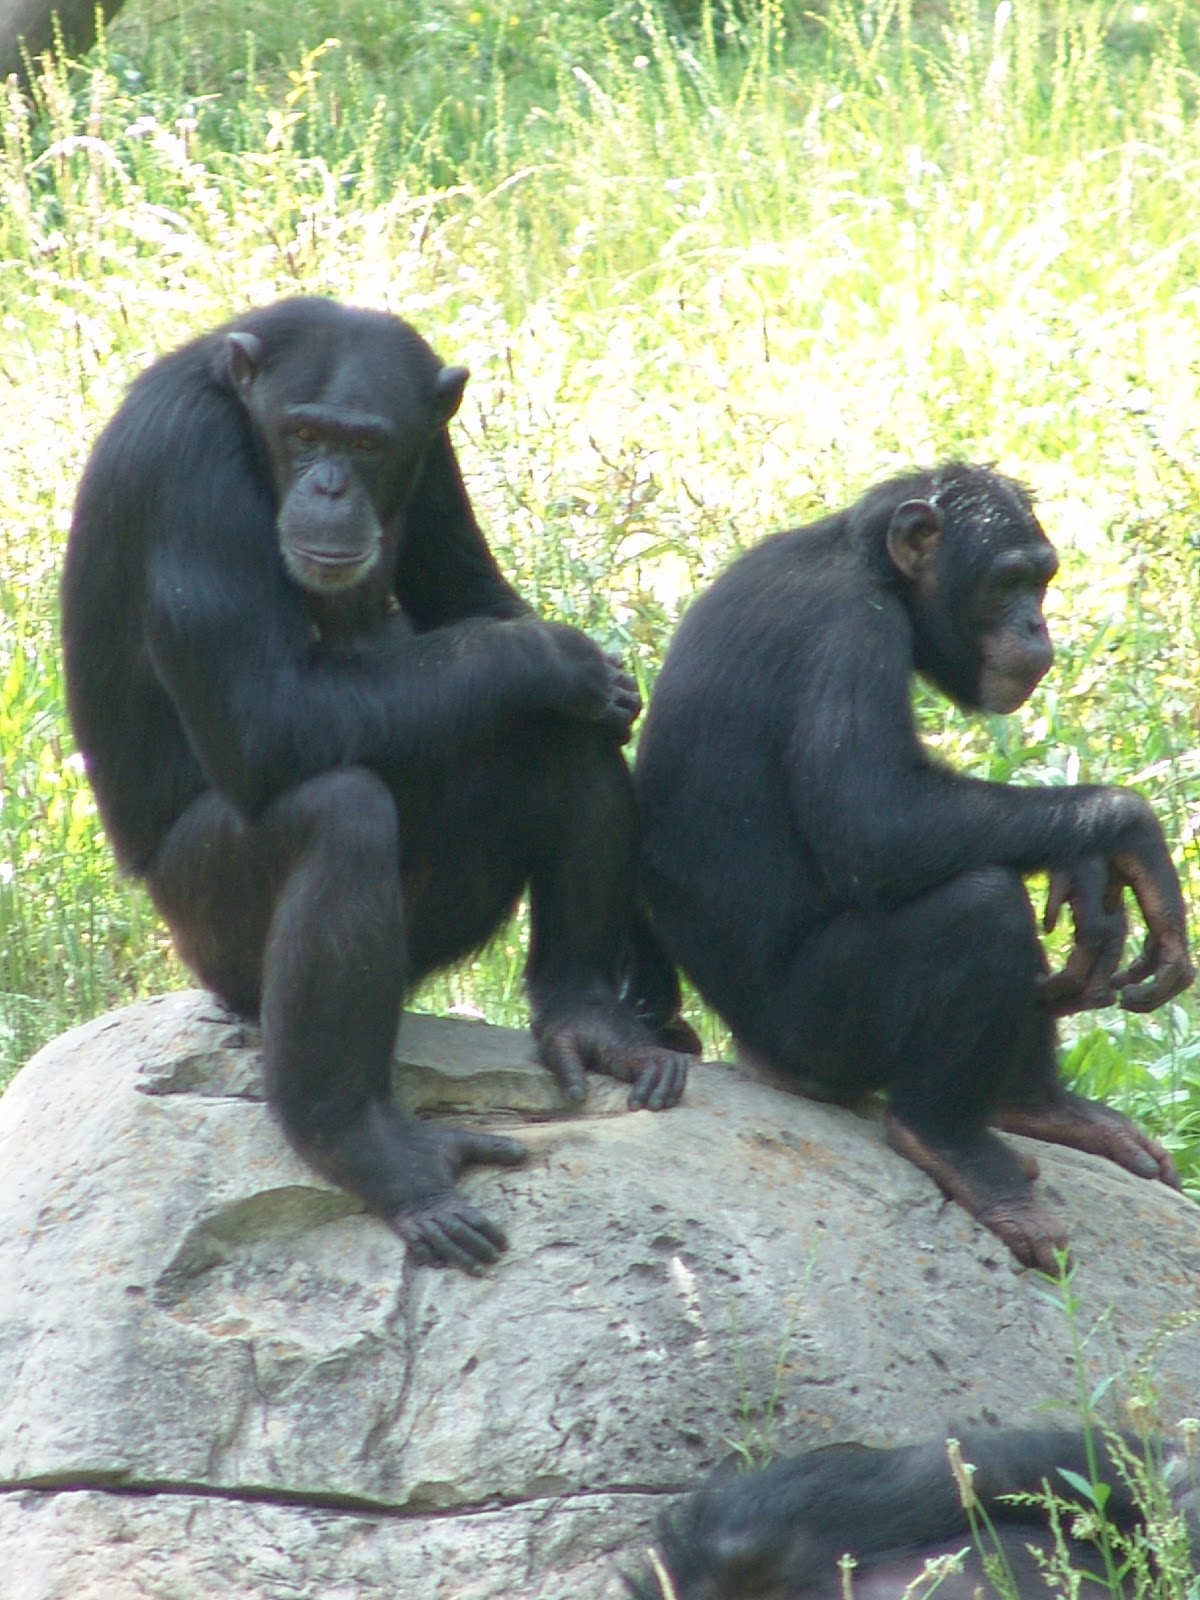 ENCYCLOPEDIA OF ANIMAL FACTS AND PICTURES: CHIMPANZEE